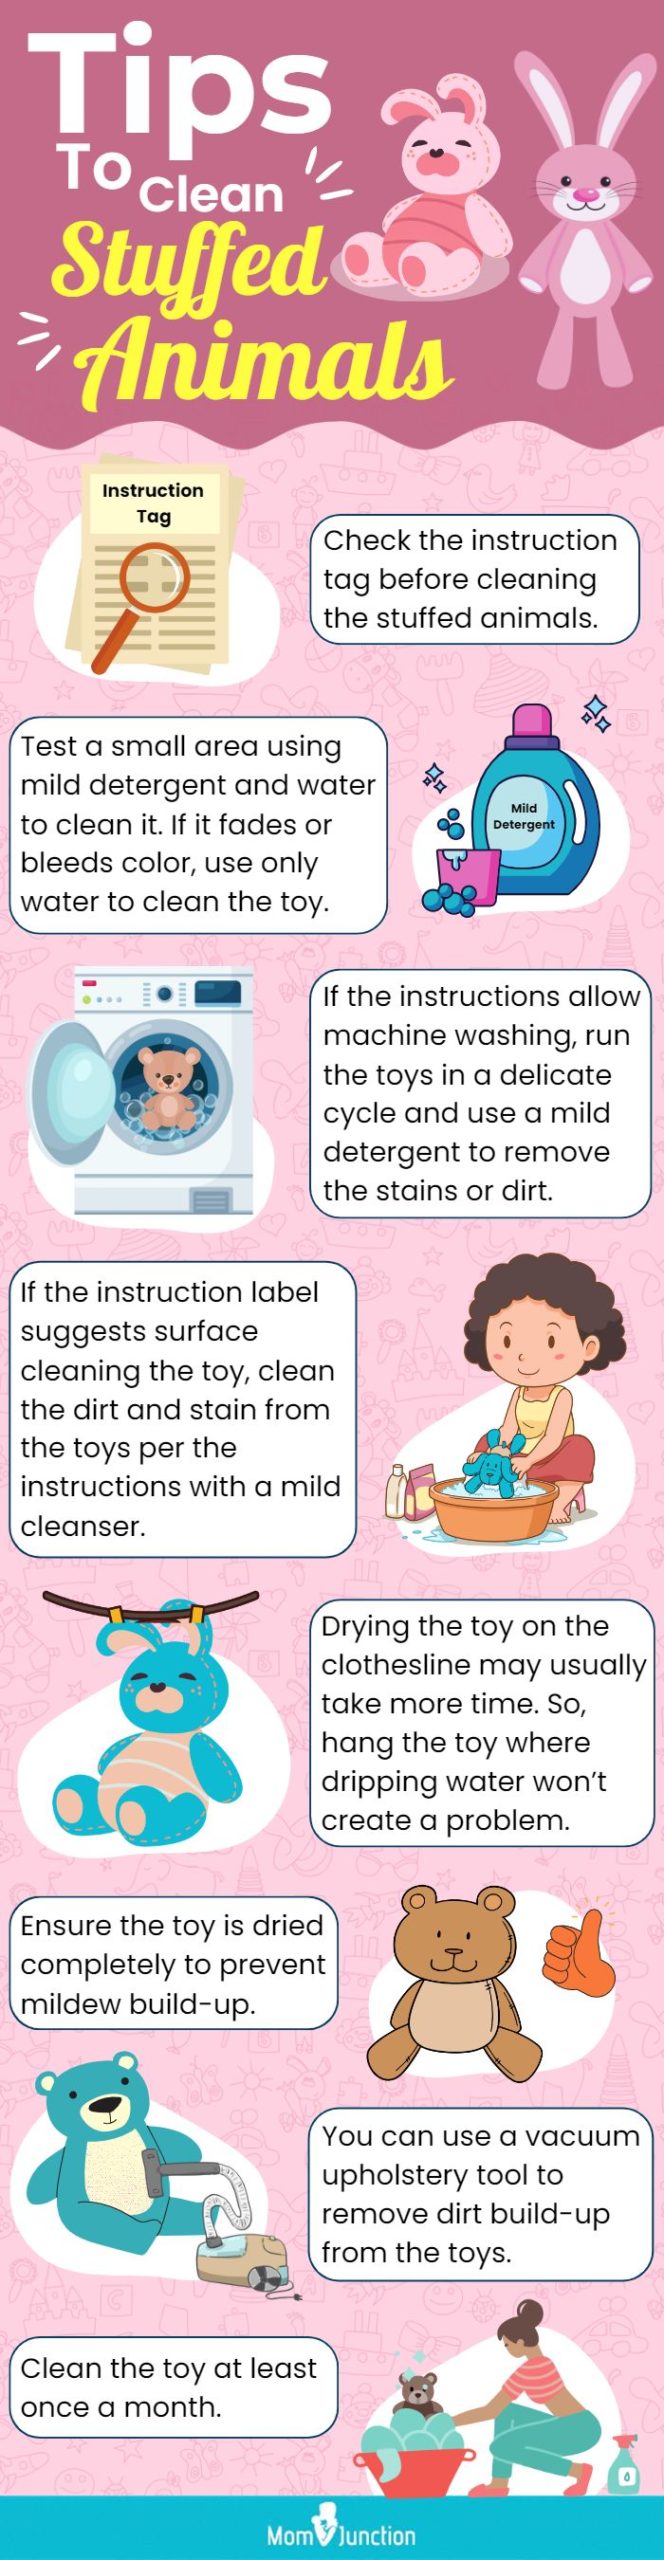 Tips To Clean Stuffed Animals